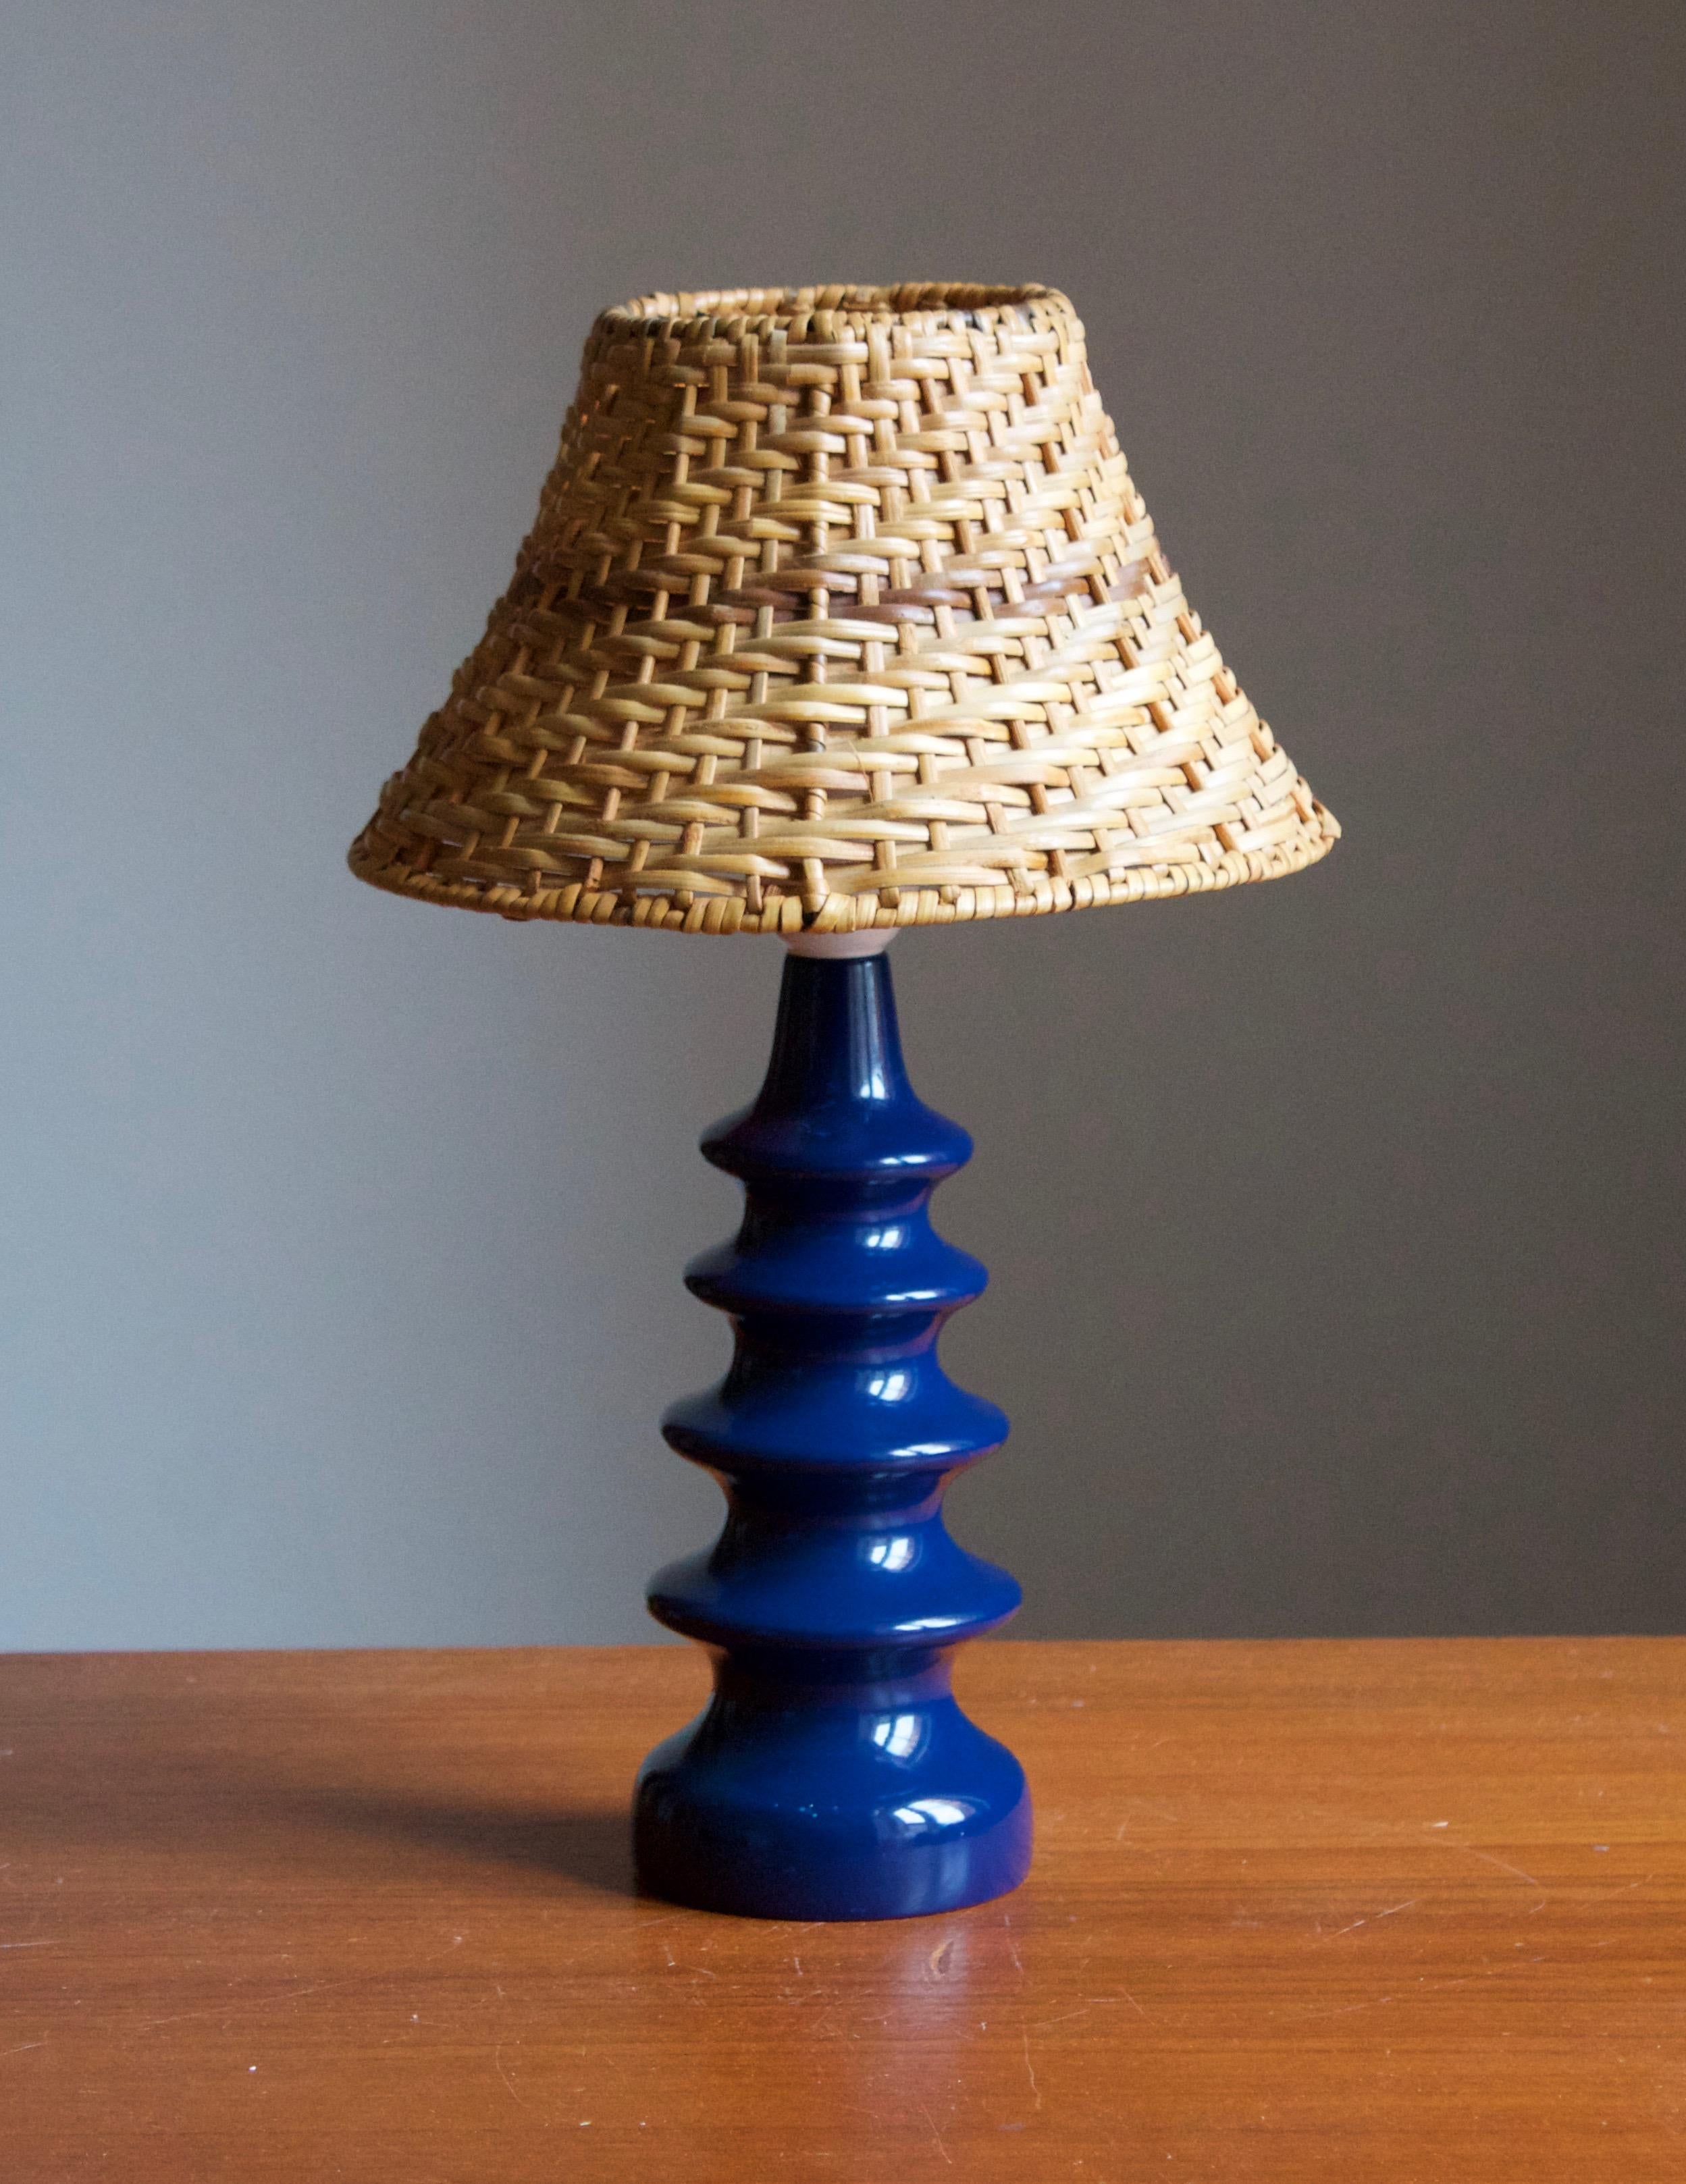 A pair of small pine table lamps, designed and produced in Sweden, c. 1970s. 

Stated dimensions exclude lampshade. Height includes socket. Assorted vintage rattan lampshade of illustrated model can be included upon request.